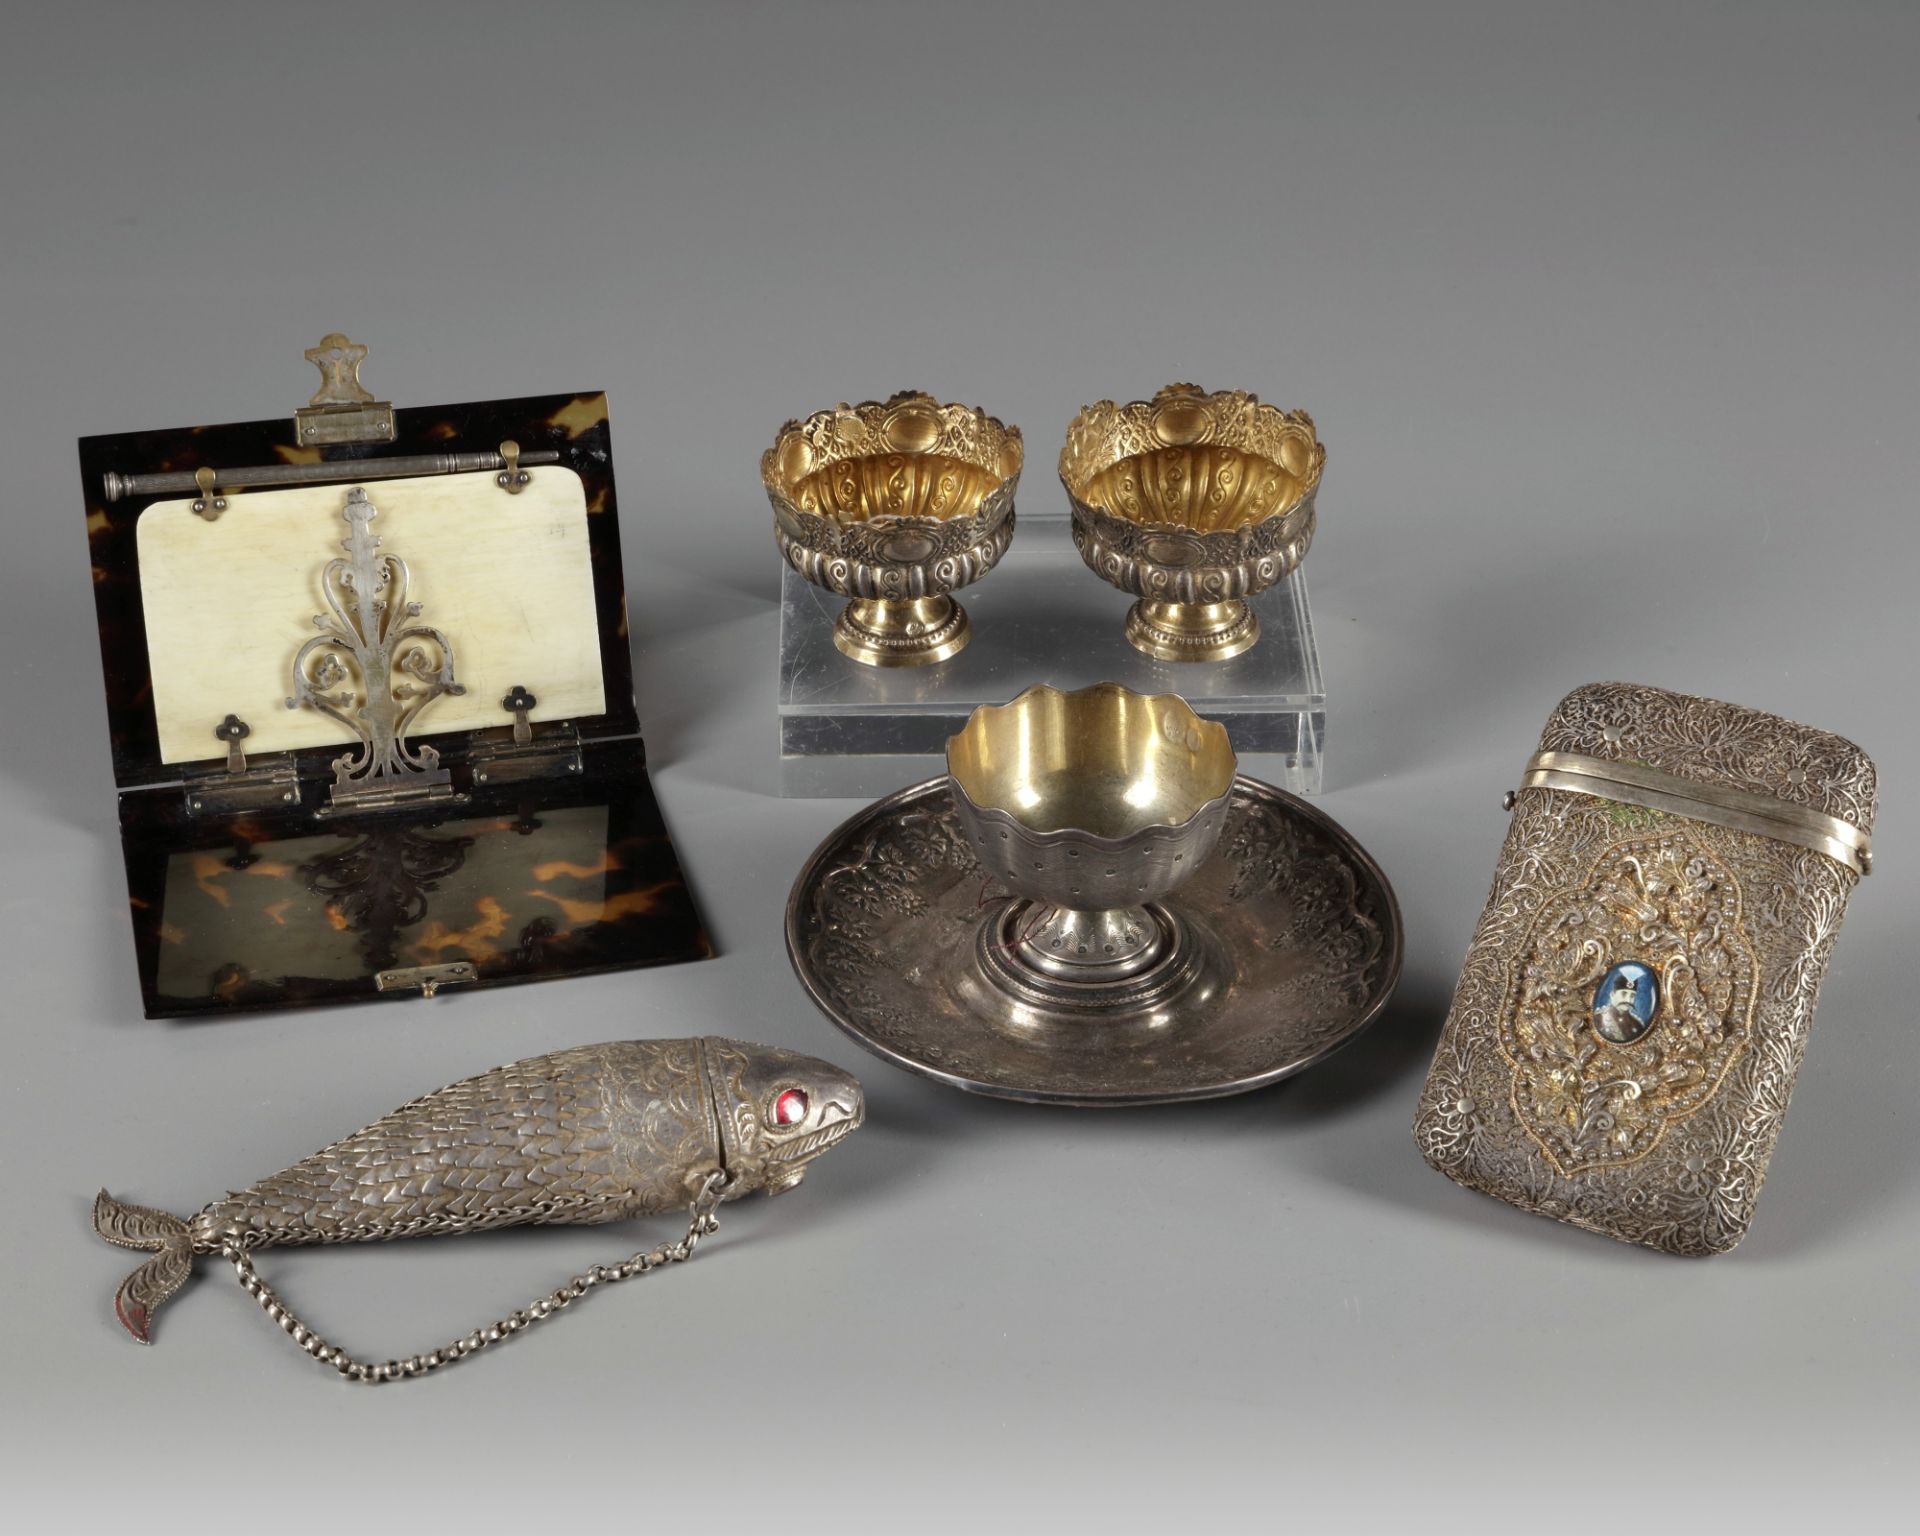 Six Islamic silver objects and a tortoise shell card holder